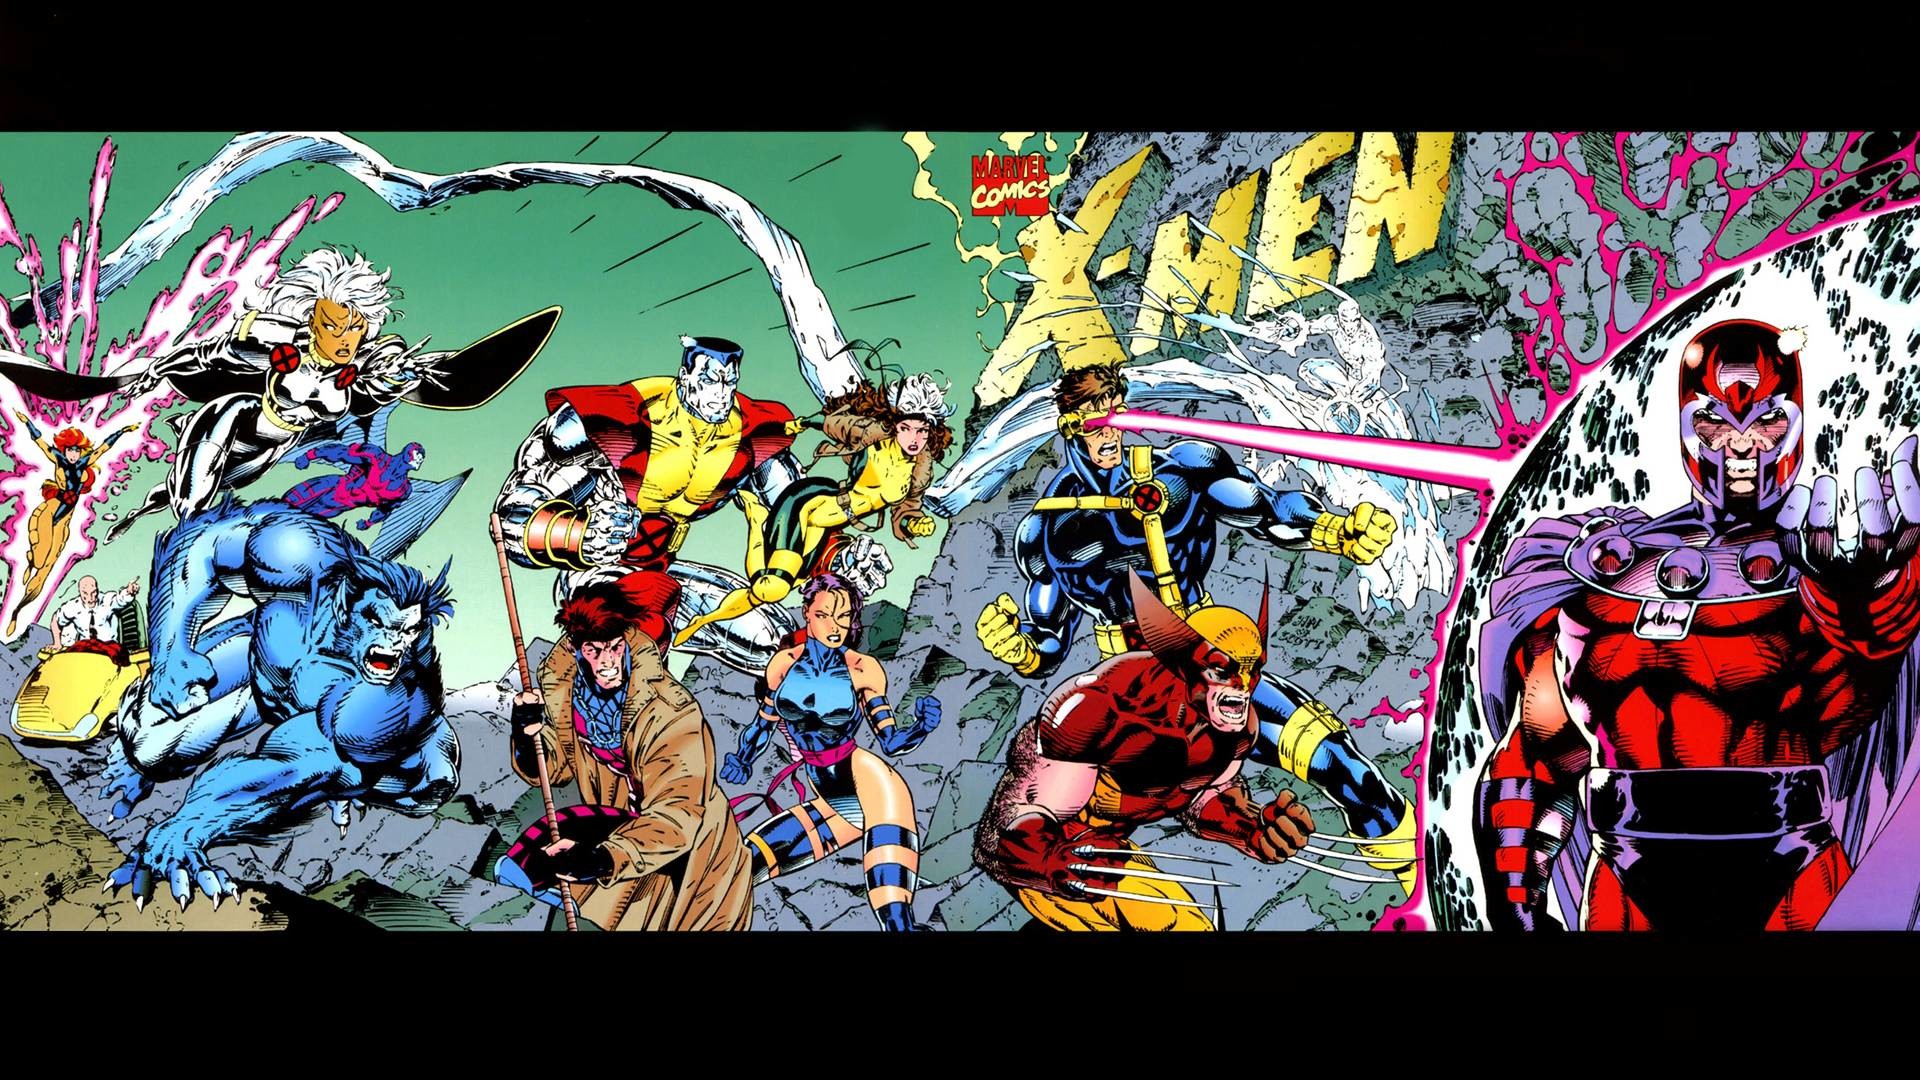 1920x1080 X-Men Wallpapers of Jim Lee from W3 | Triton World